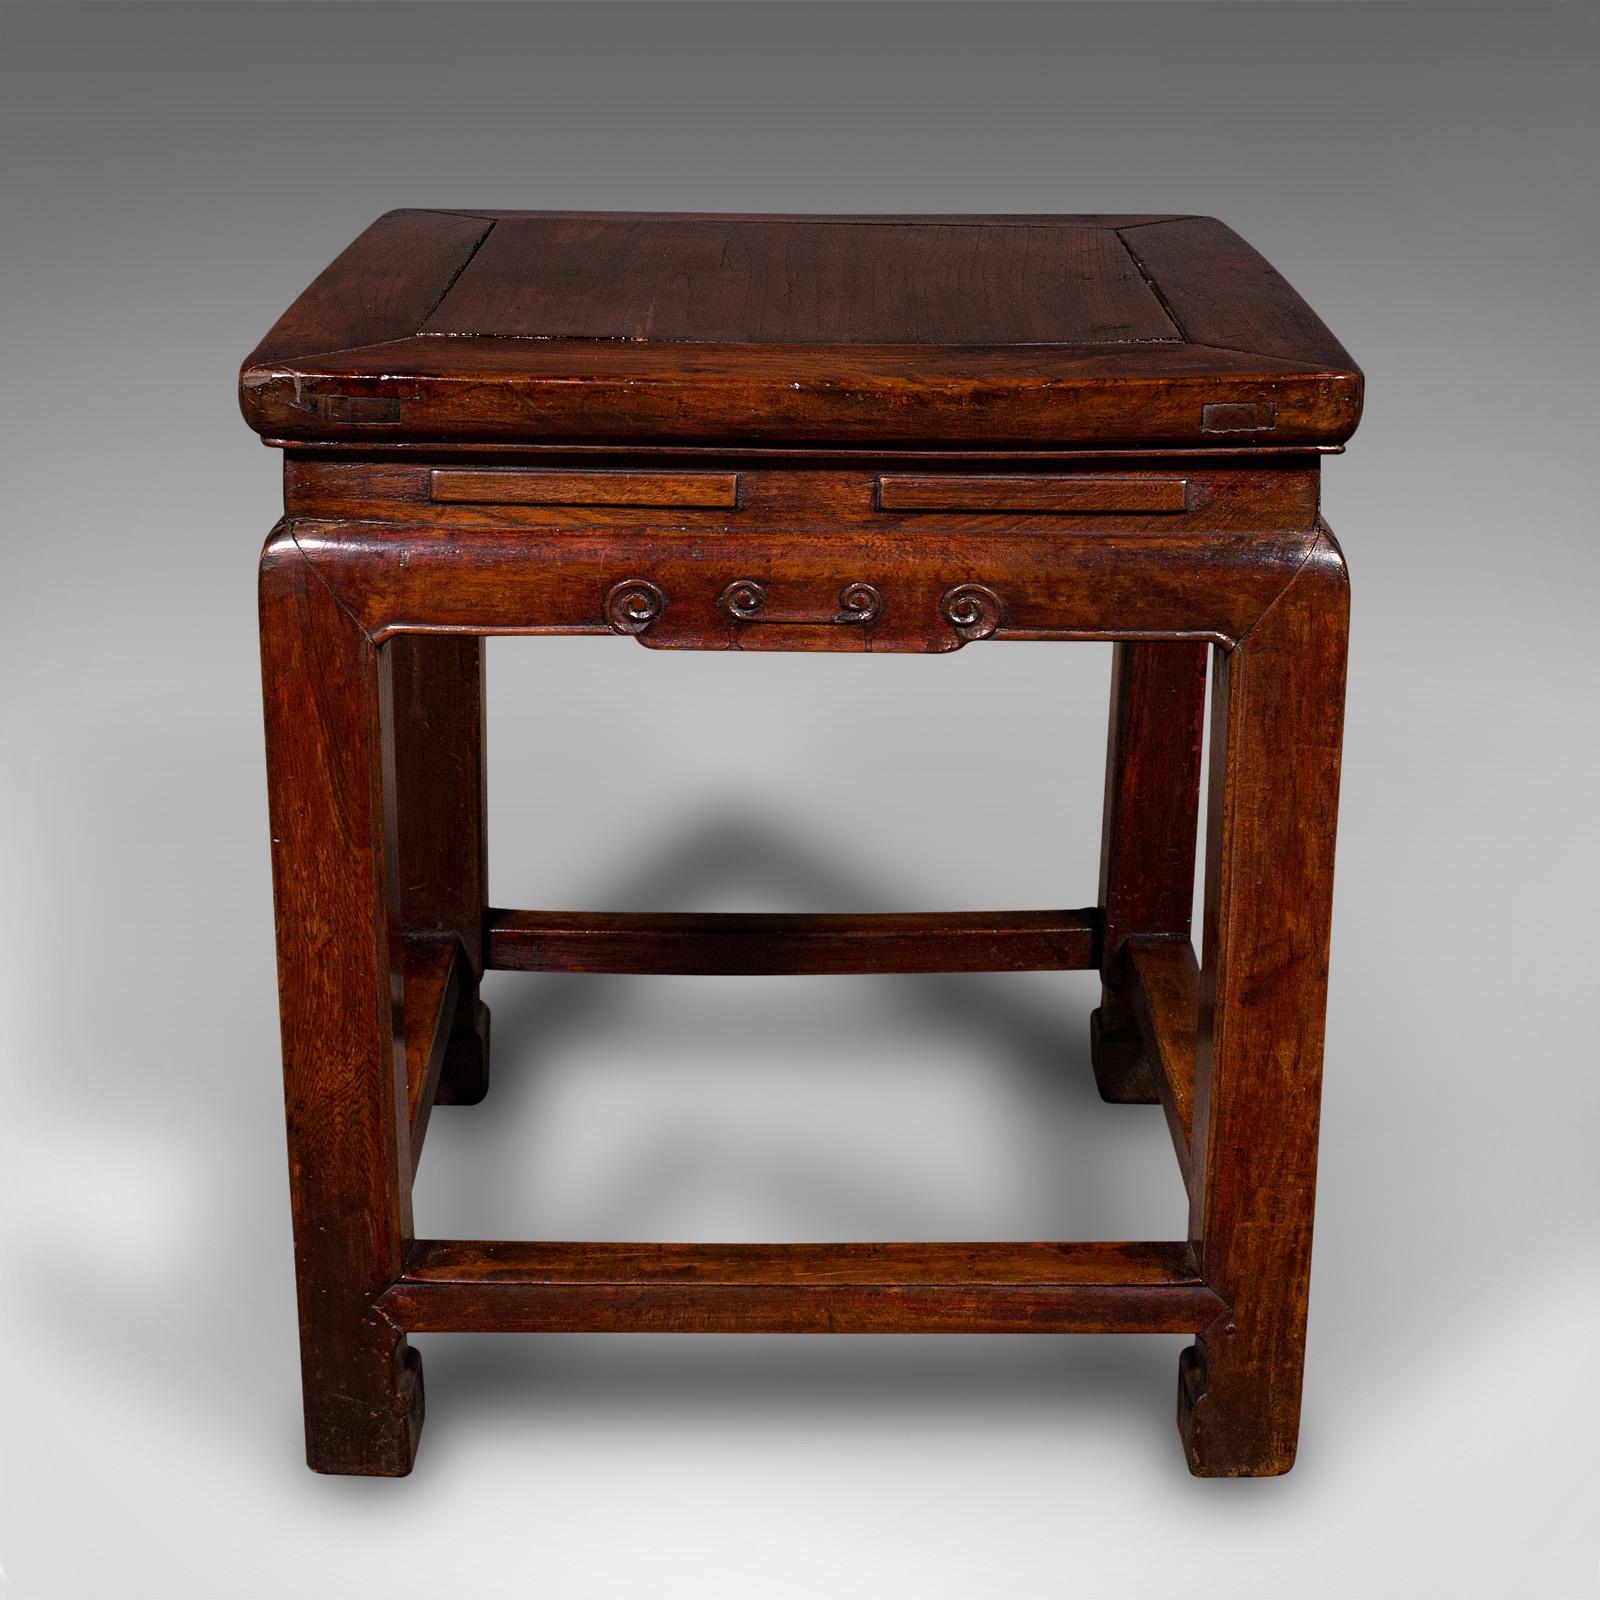 Chinese Export Small Antique Occasional Table, Oriental, Chinese Elm, Accent Stool, Victorian